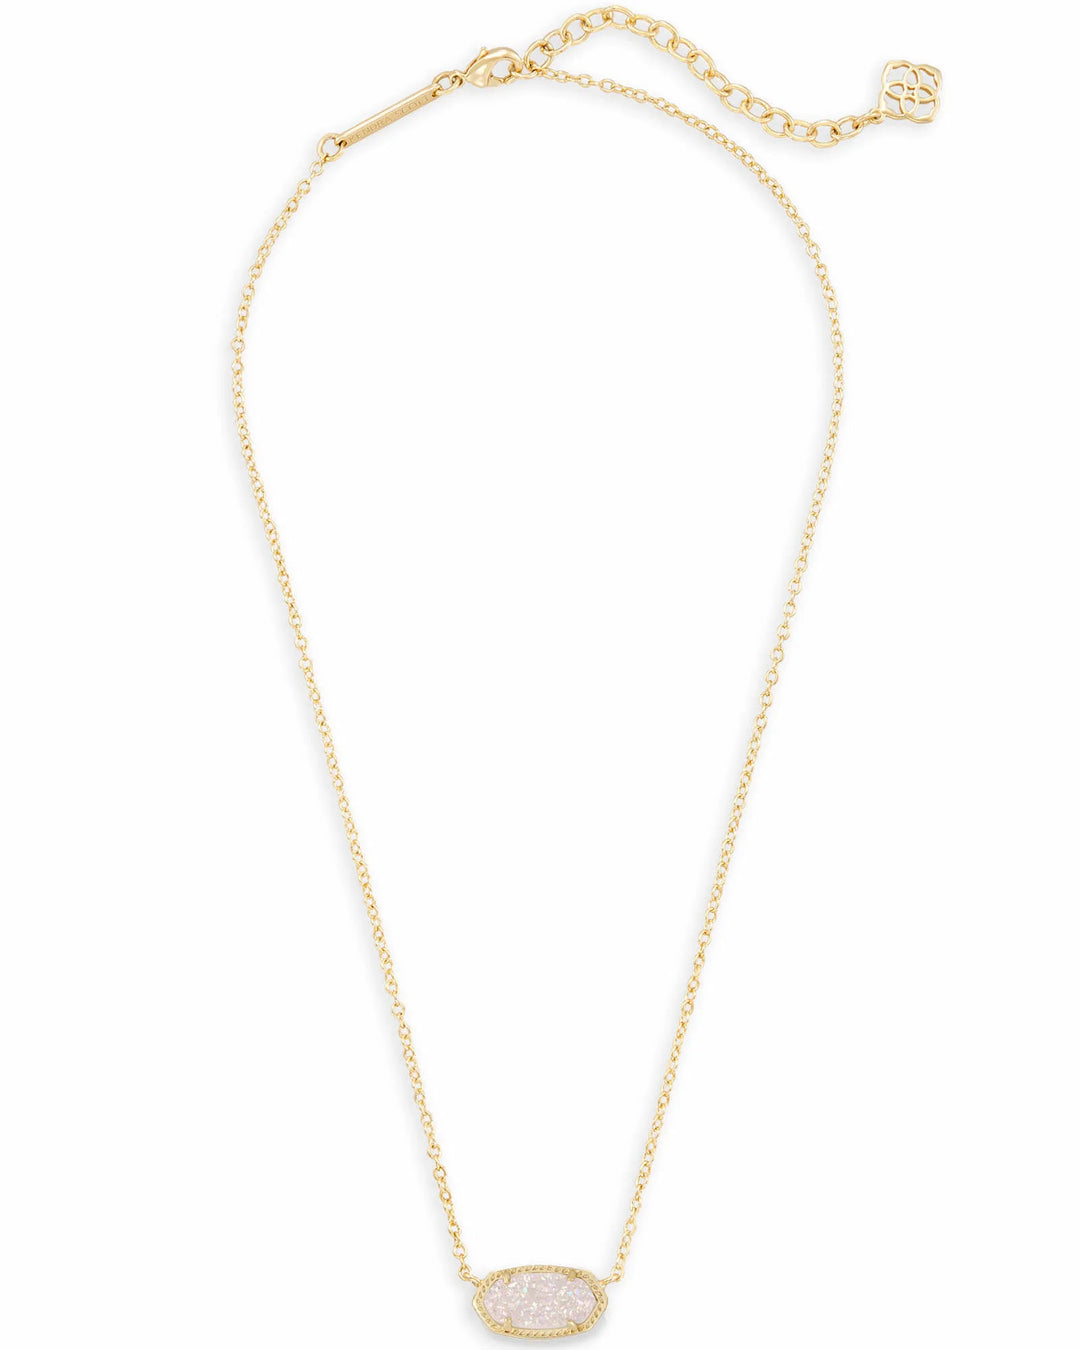 Kendra Scott Elisa Boxed Pendant Necklace in Gold Iridescent Drusy